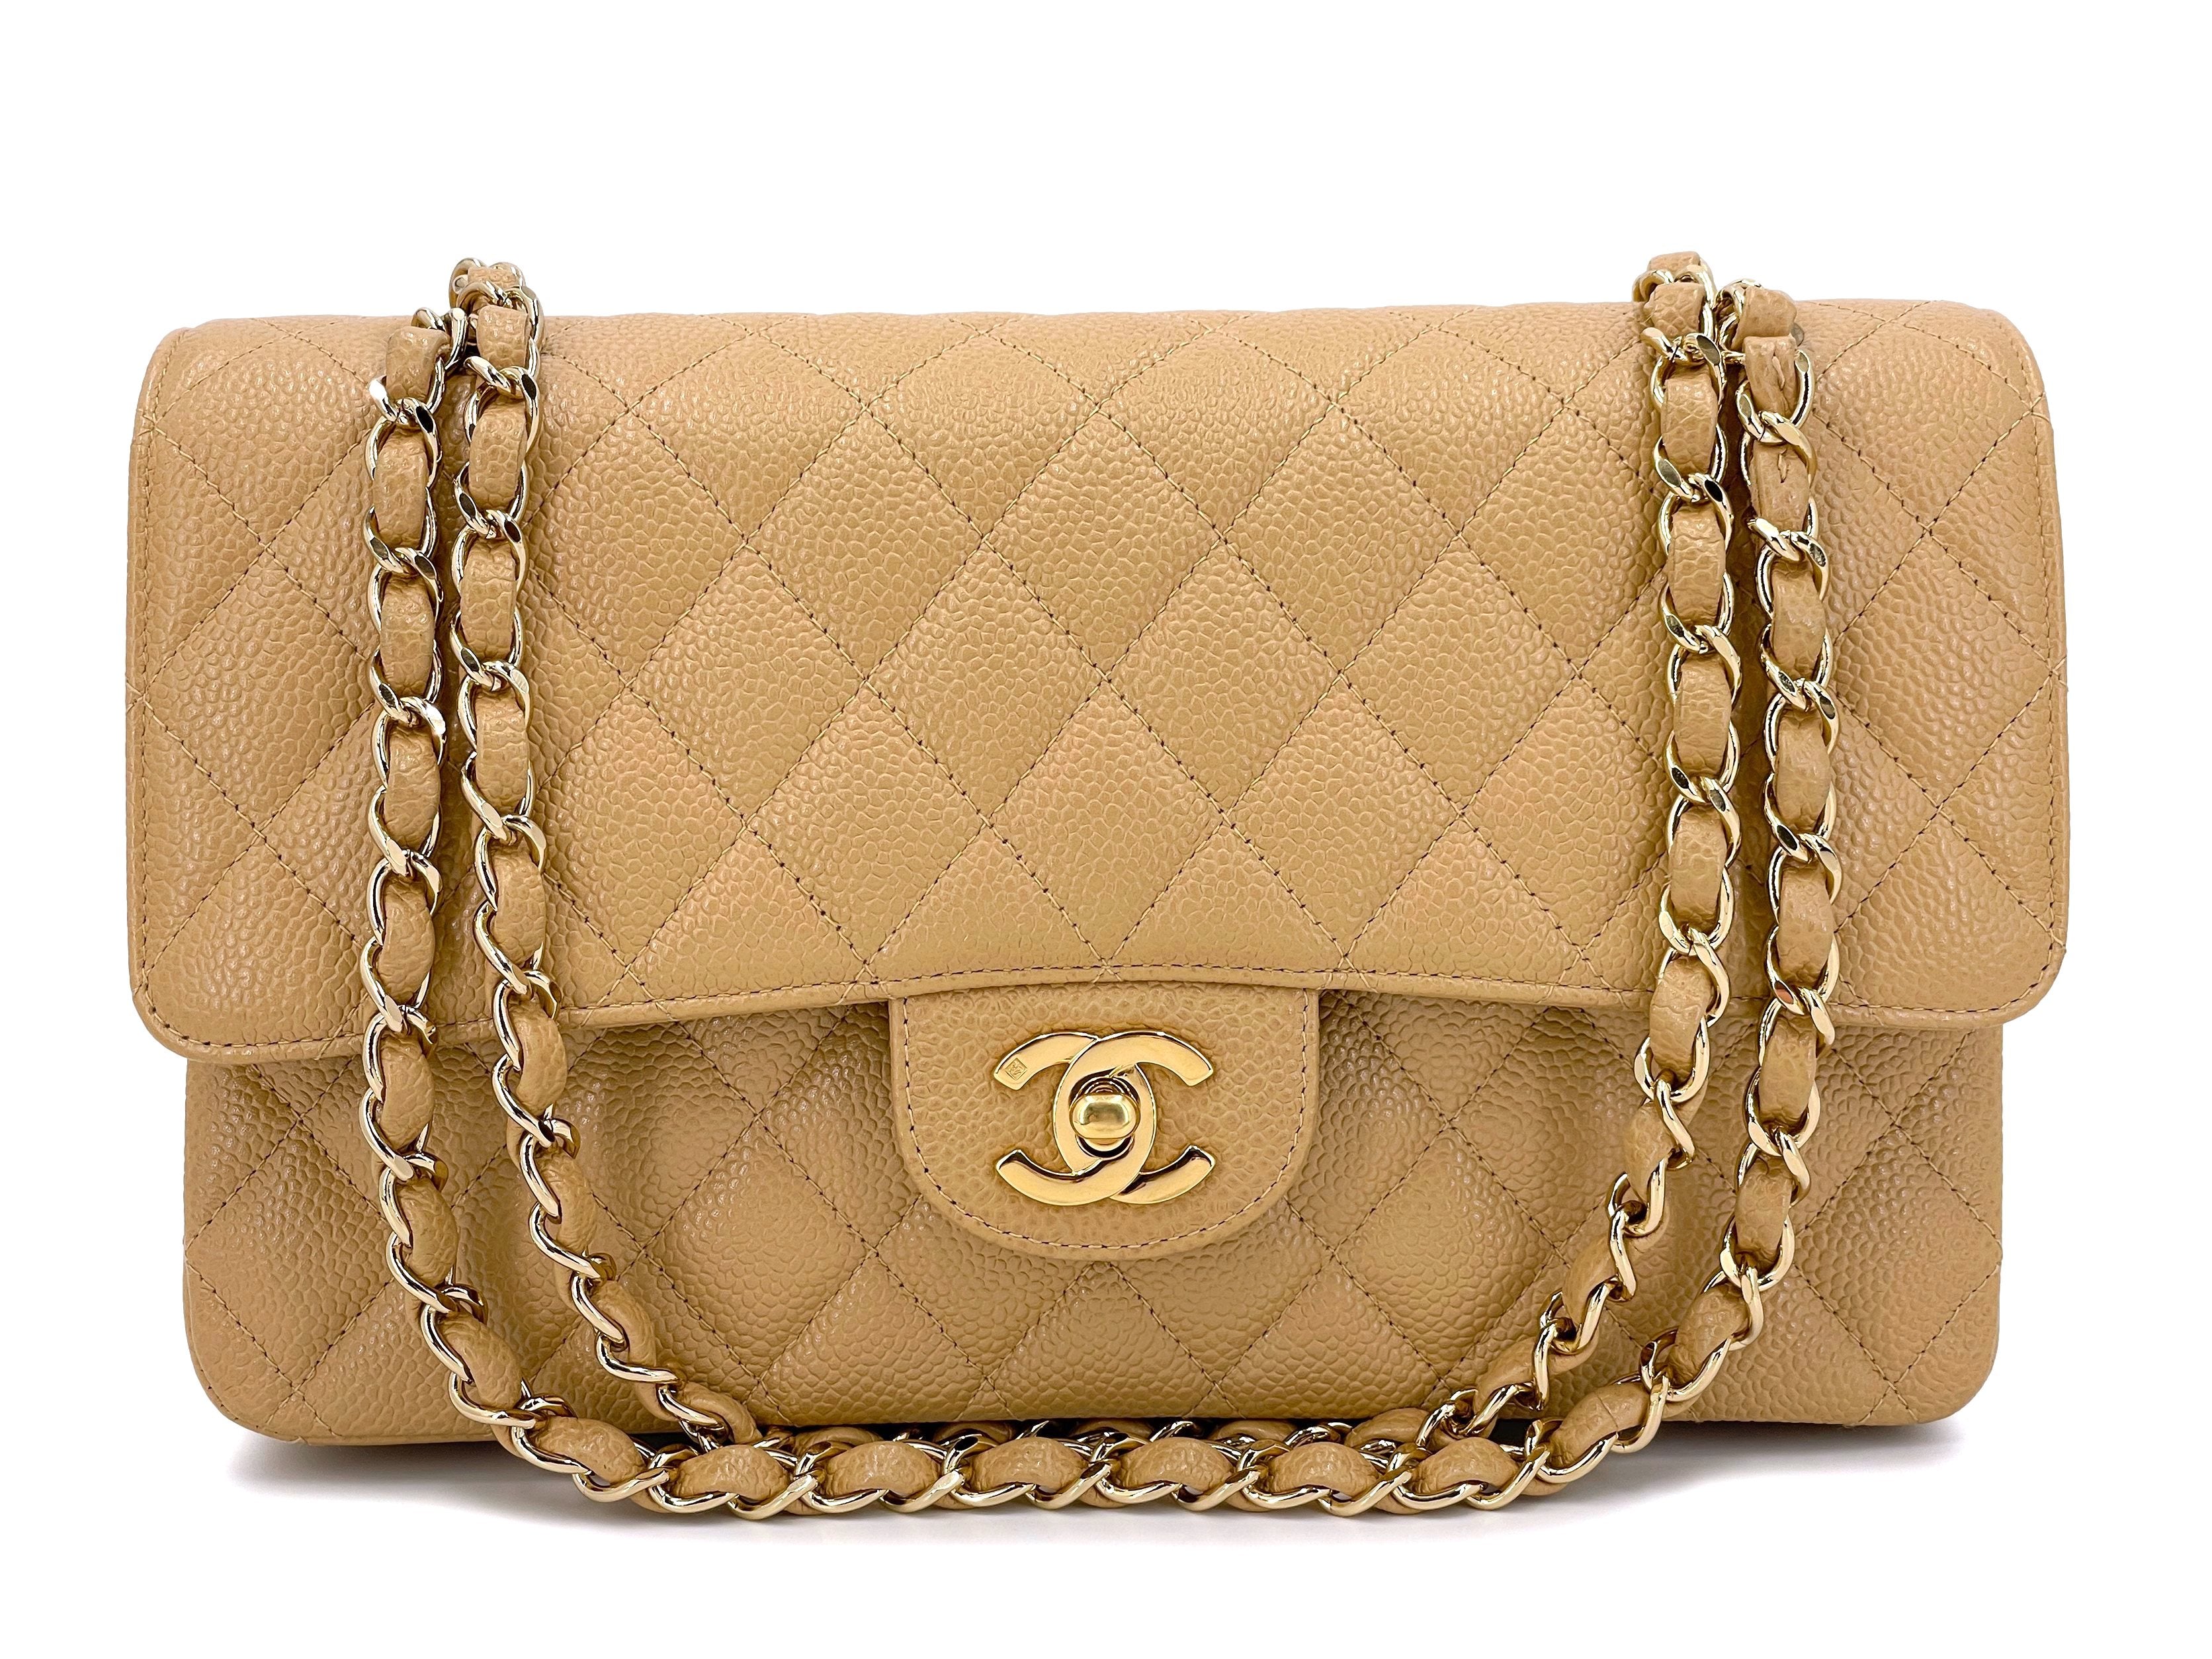 Boutique Patina - Pristine Vintage on Instagram: Chanel Vintage Caramel  Beige Caviar Medium Classic Flap Bag 24k GHW Take $200 off using code  VIP200OFF. Click on product tag for full listing, description